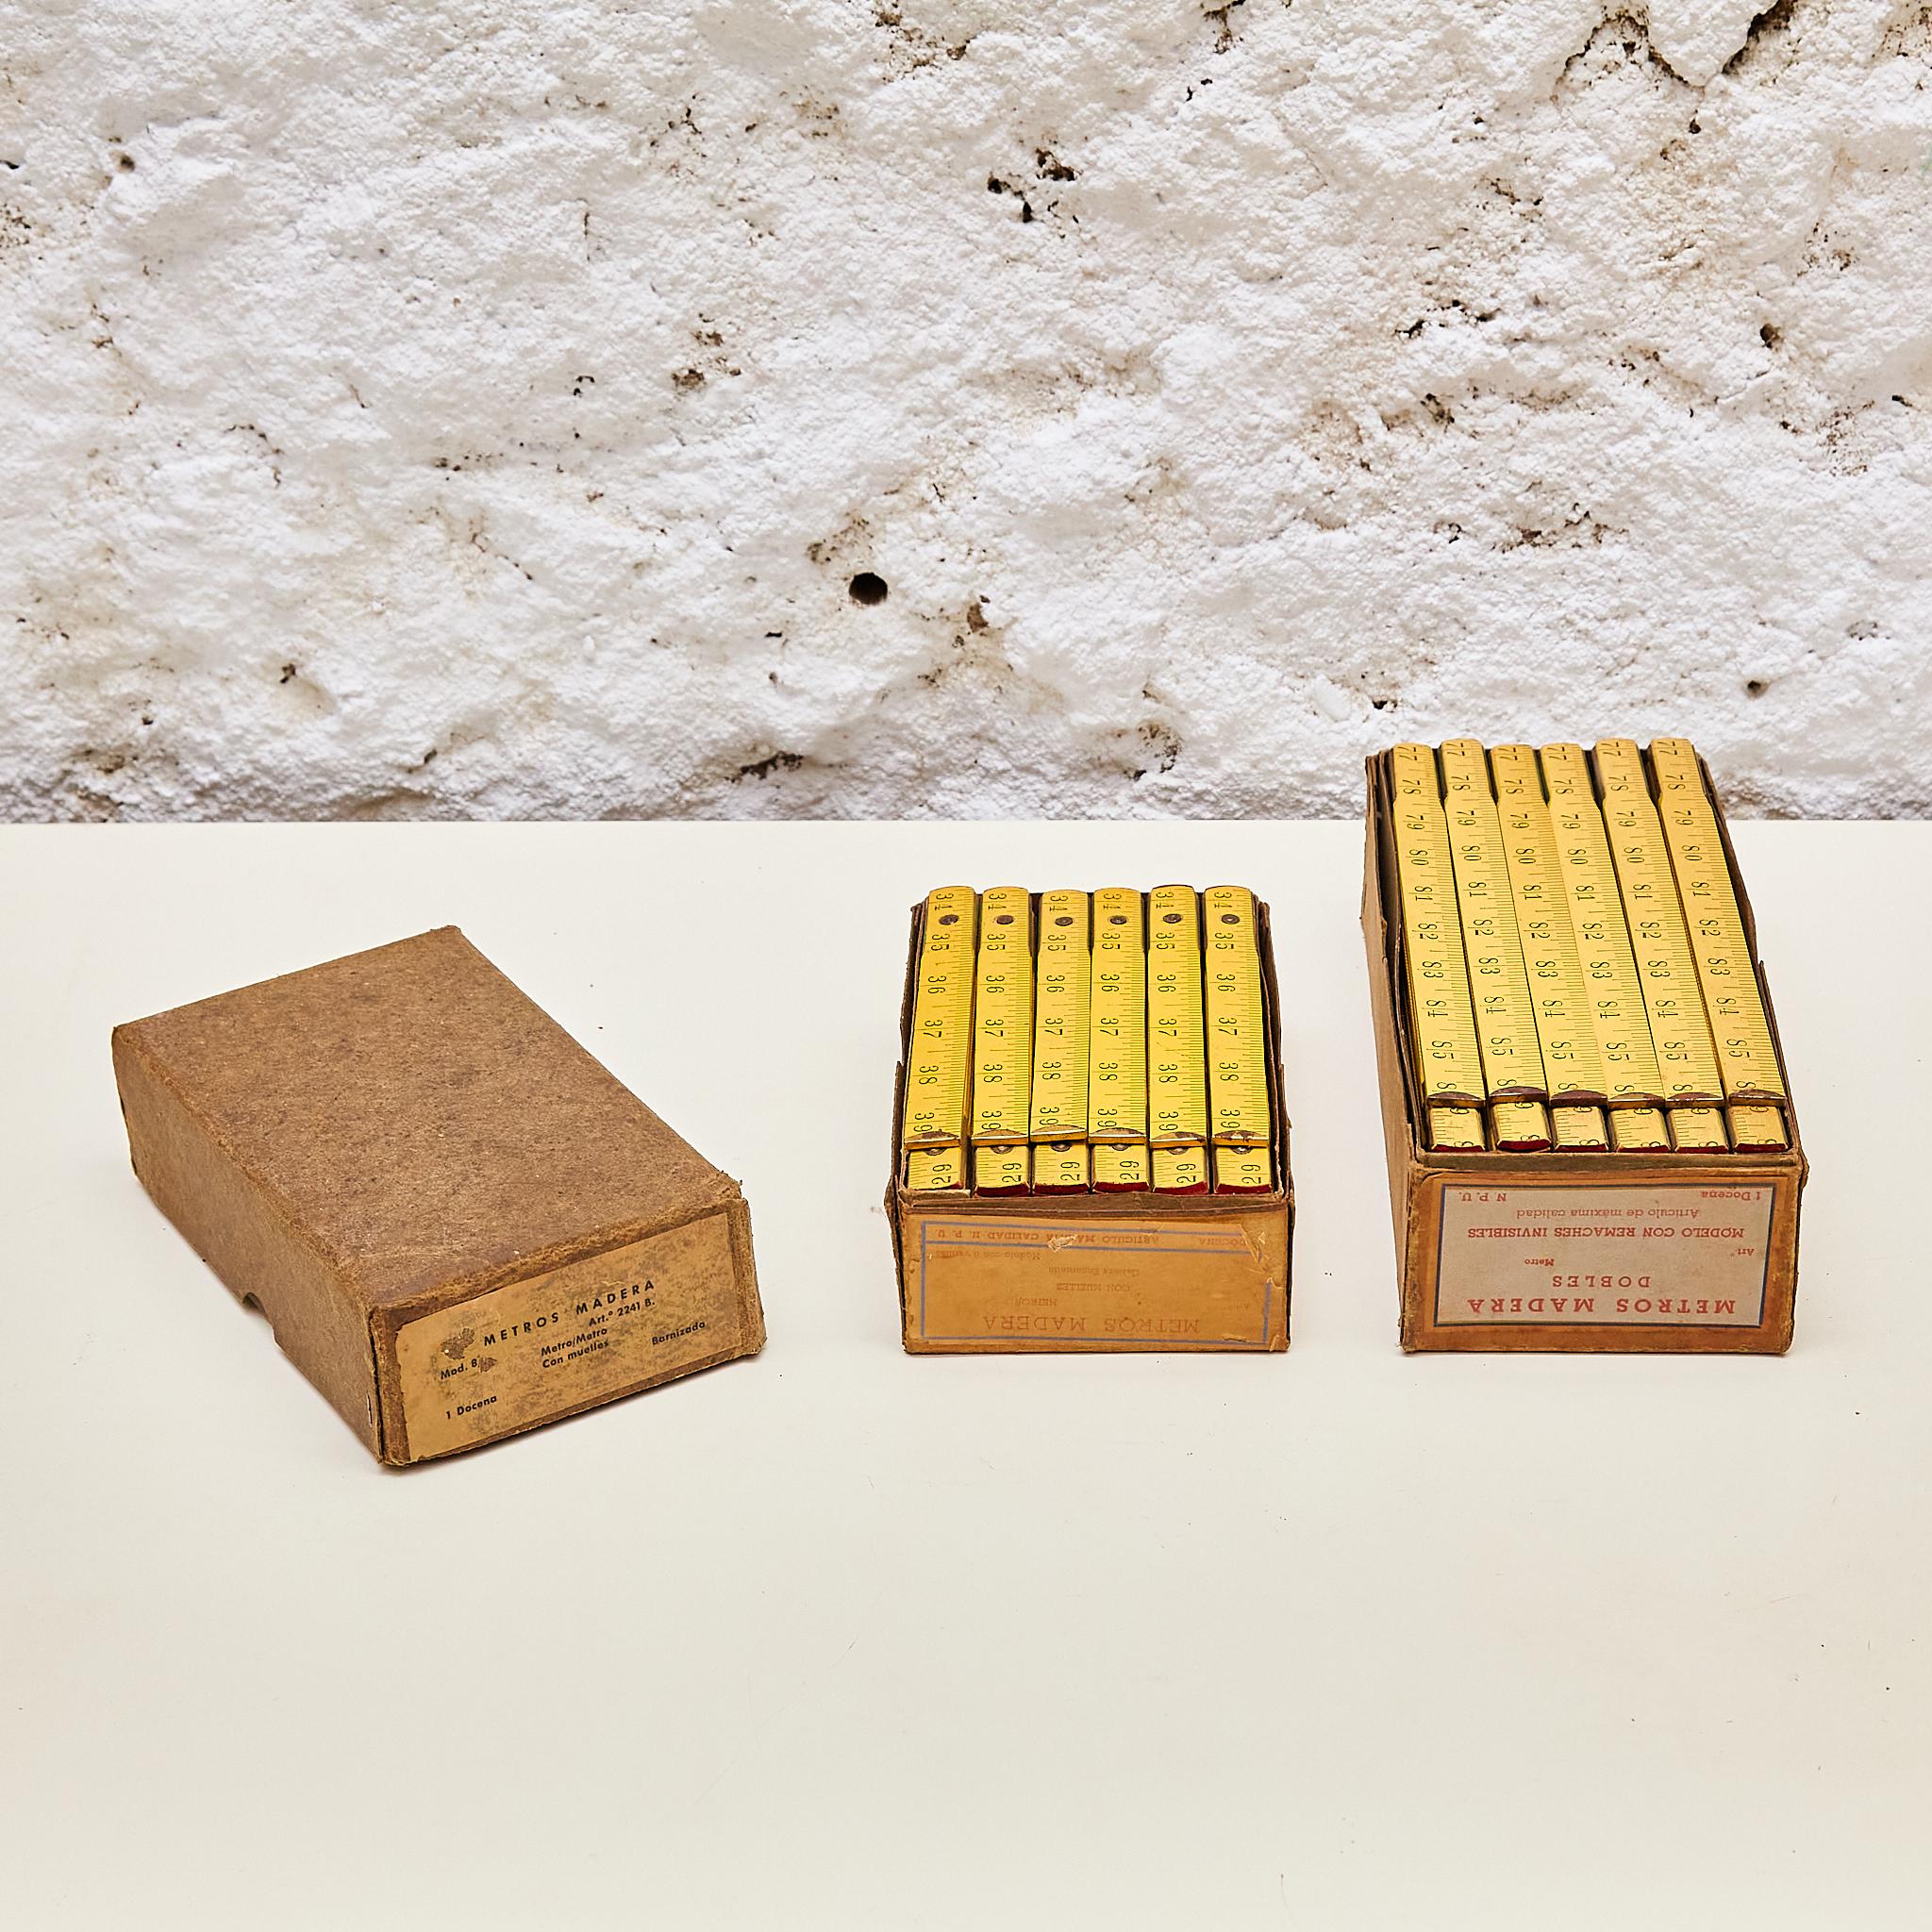 Discover vintage allure with this remarkable set of 36 antique wooden measuring tapes, complete with their original boxes, dating back to circa 1940. Each piece in this collection transports you to a bygone era, evoking the nostalgia of